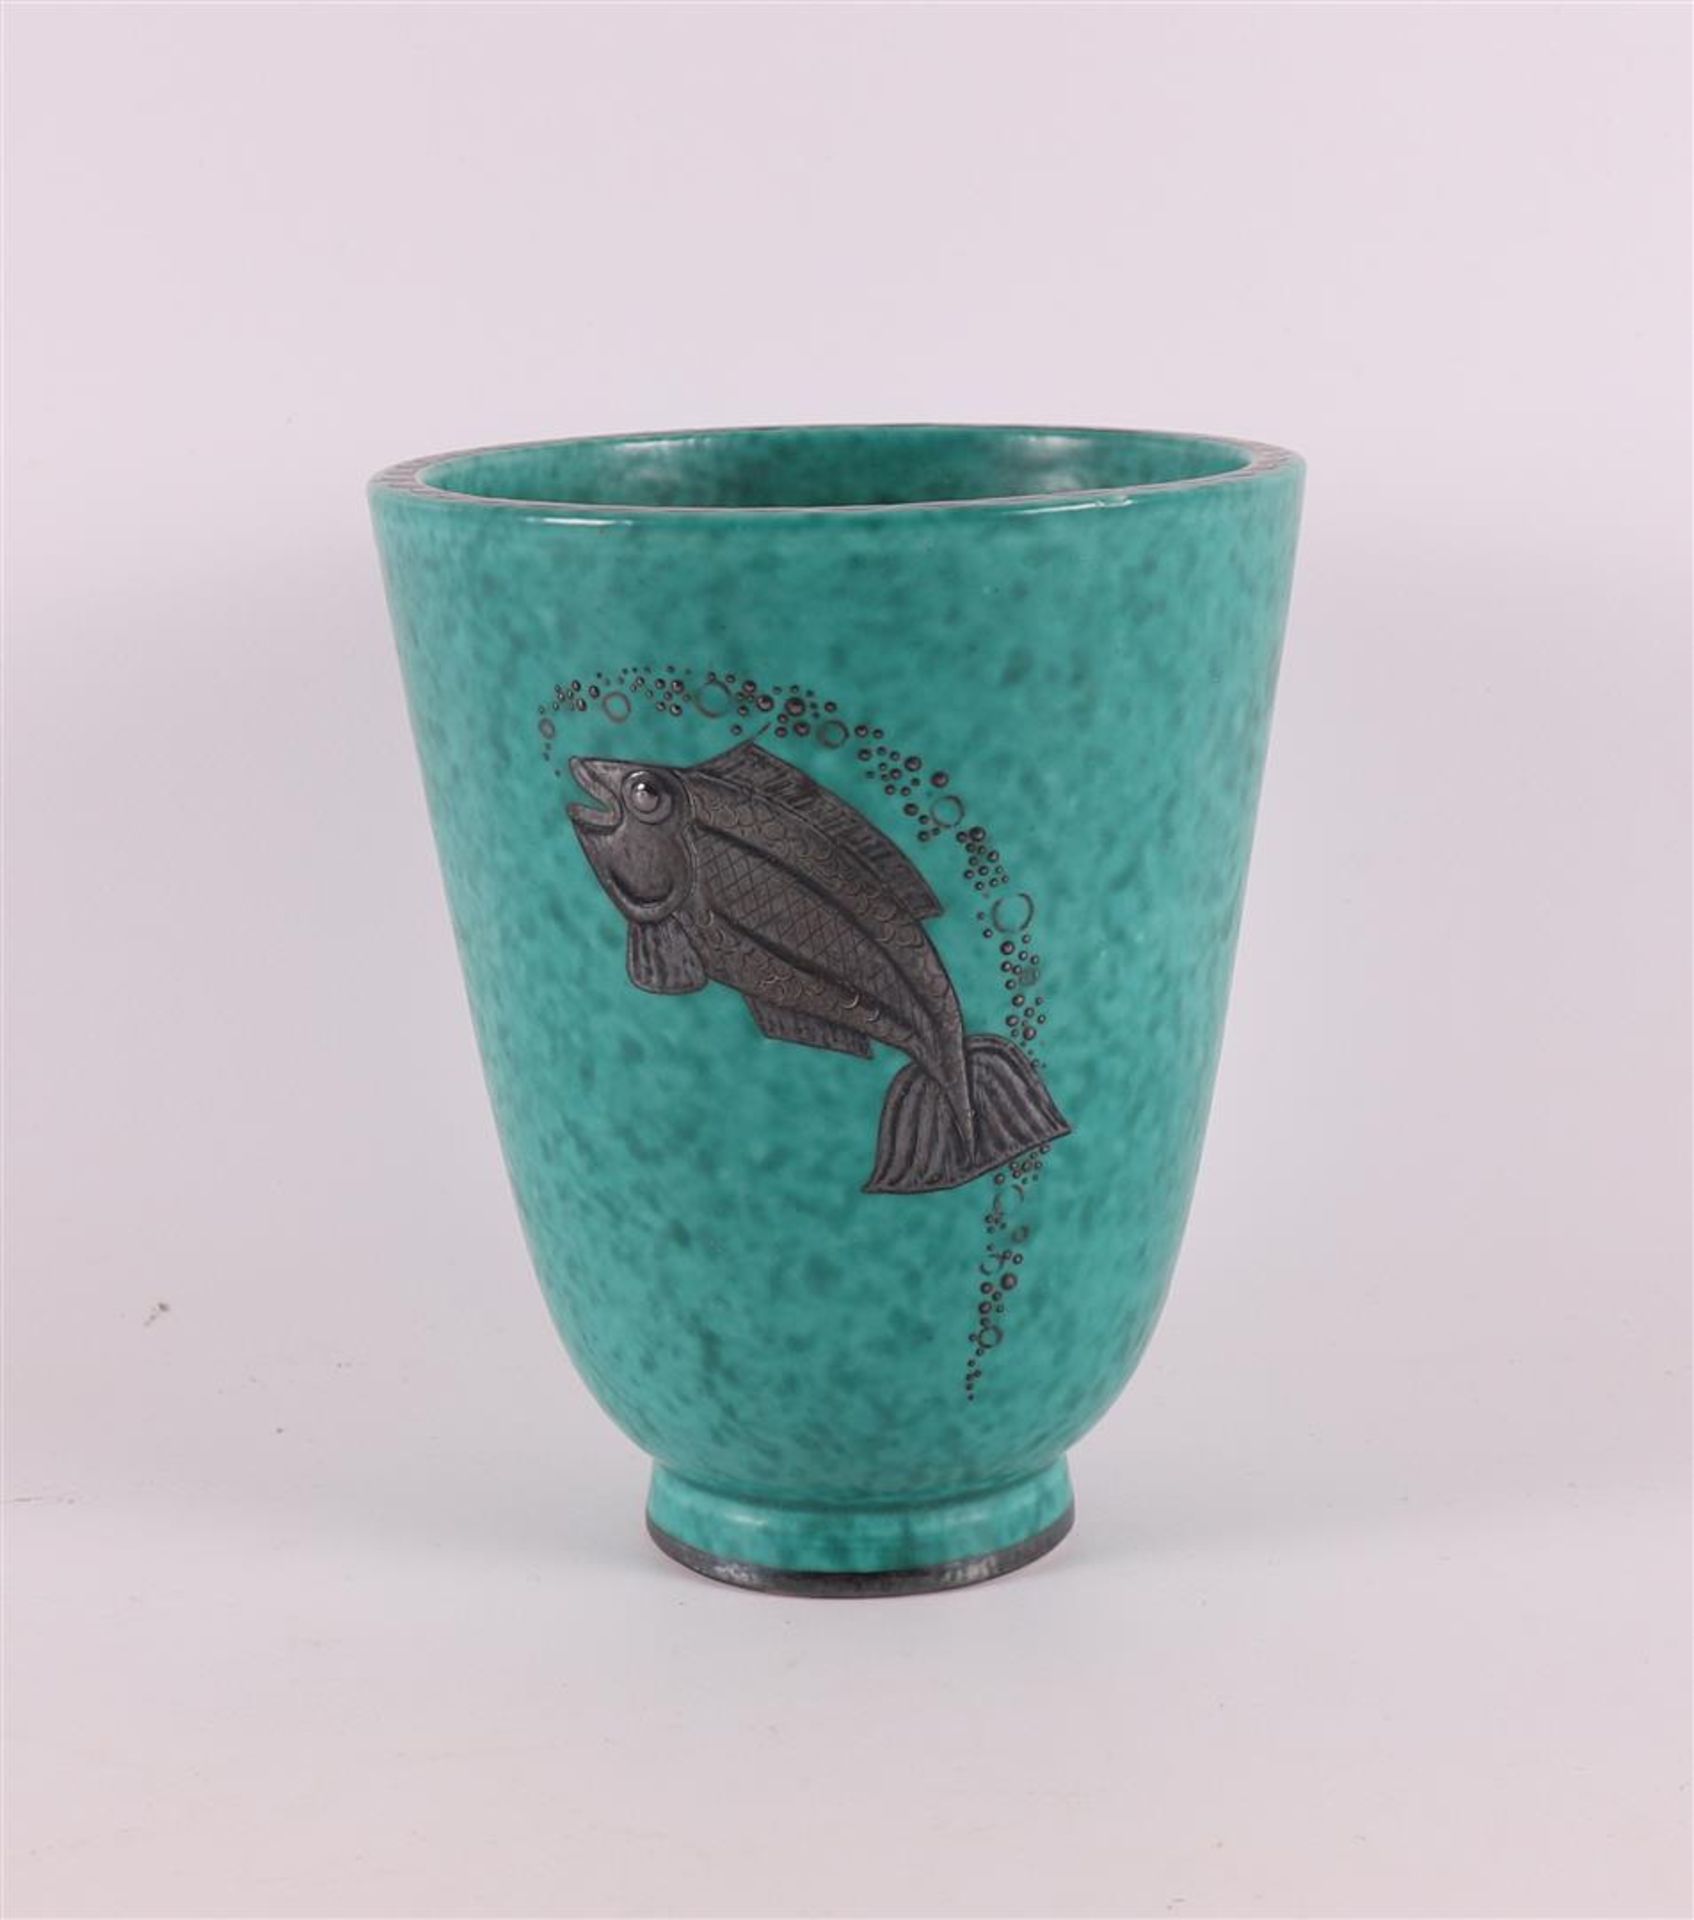 A green glazed vase with fish appliqué, Sweden mid 20th century.